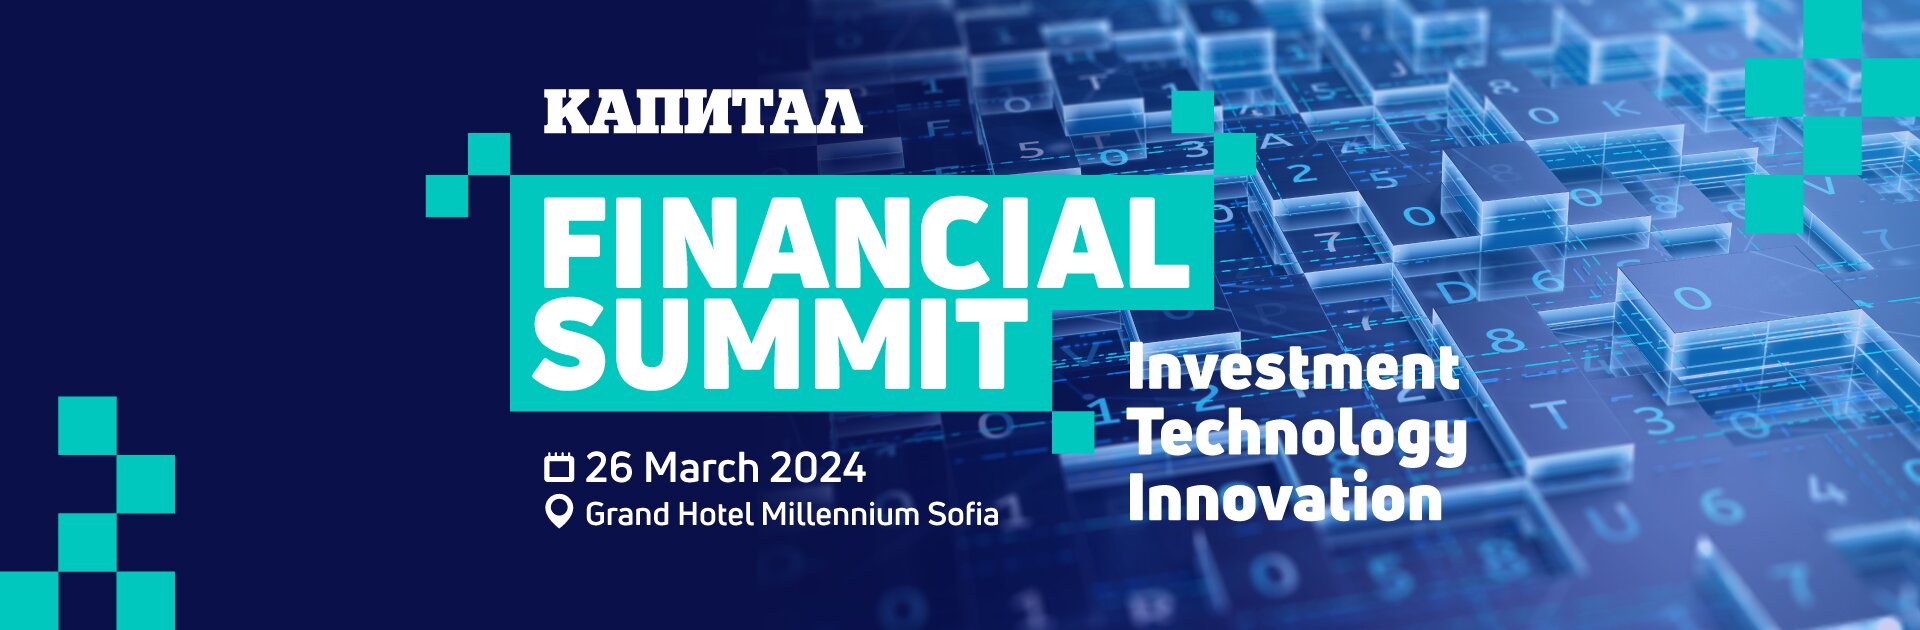 Financial Summit: Investment, Technology, Innovation